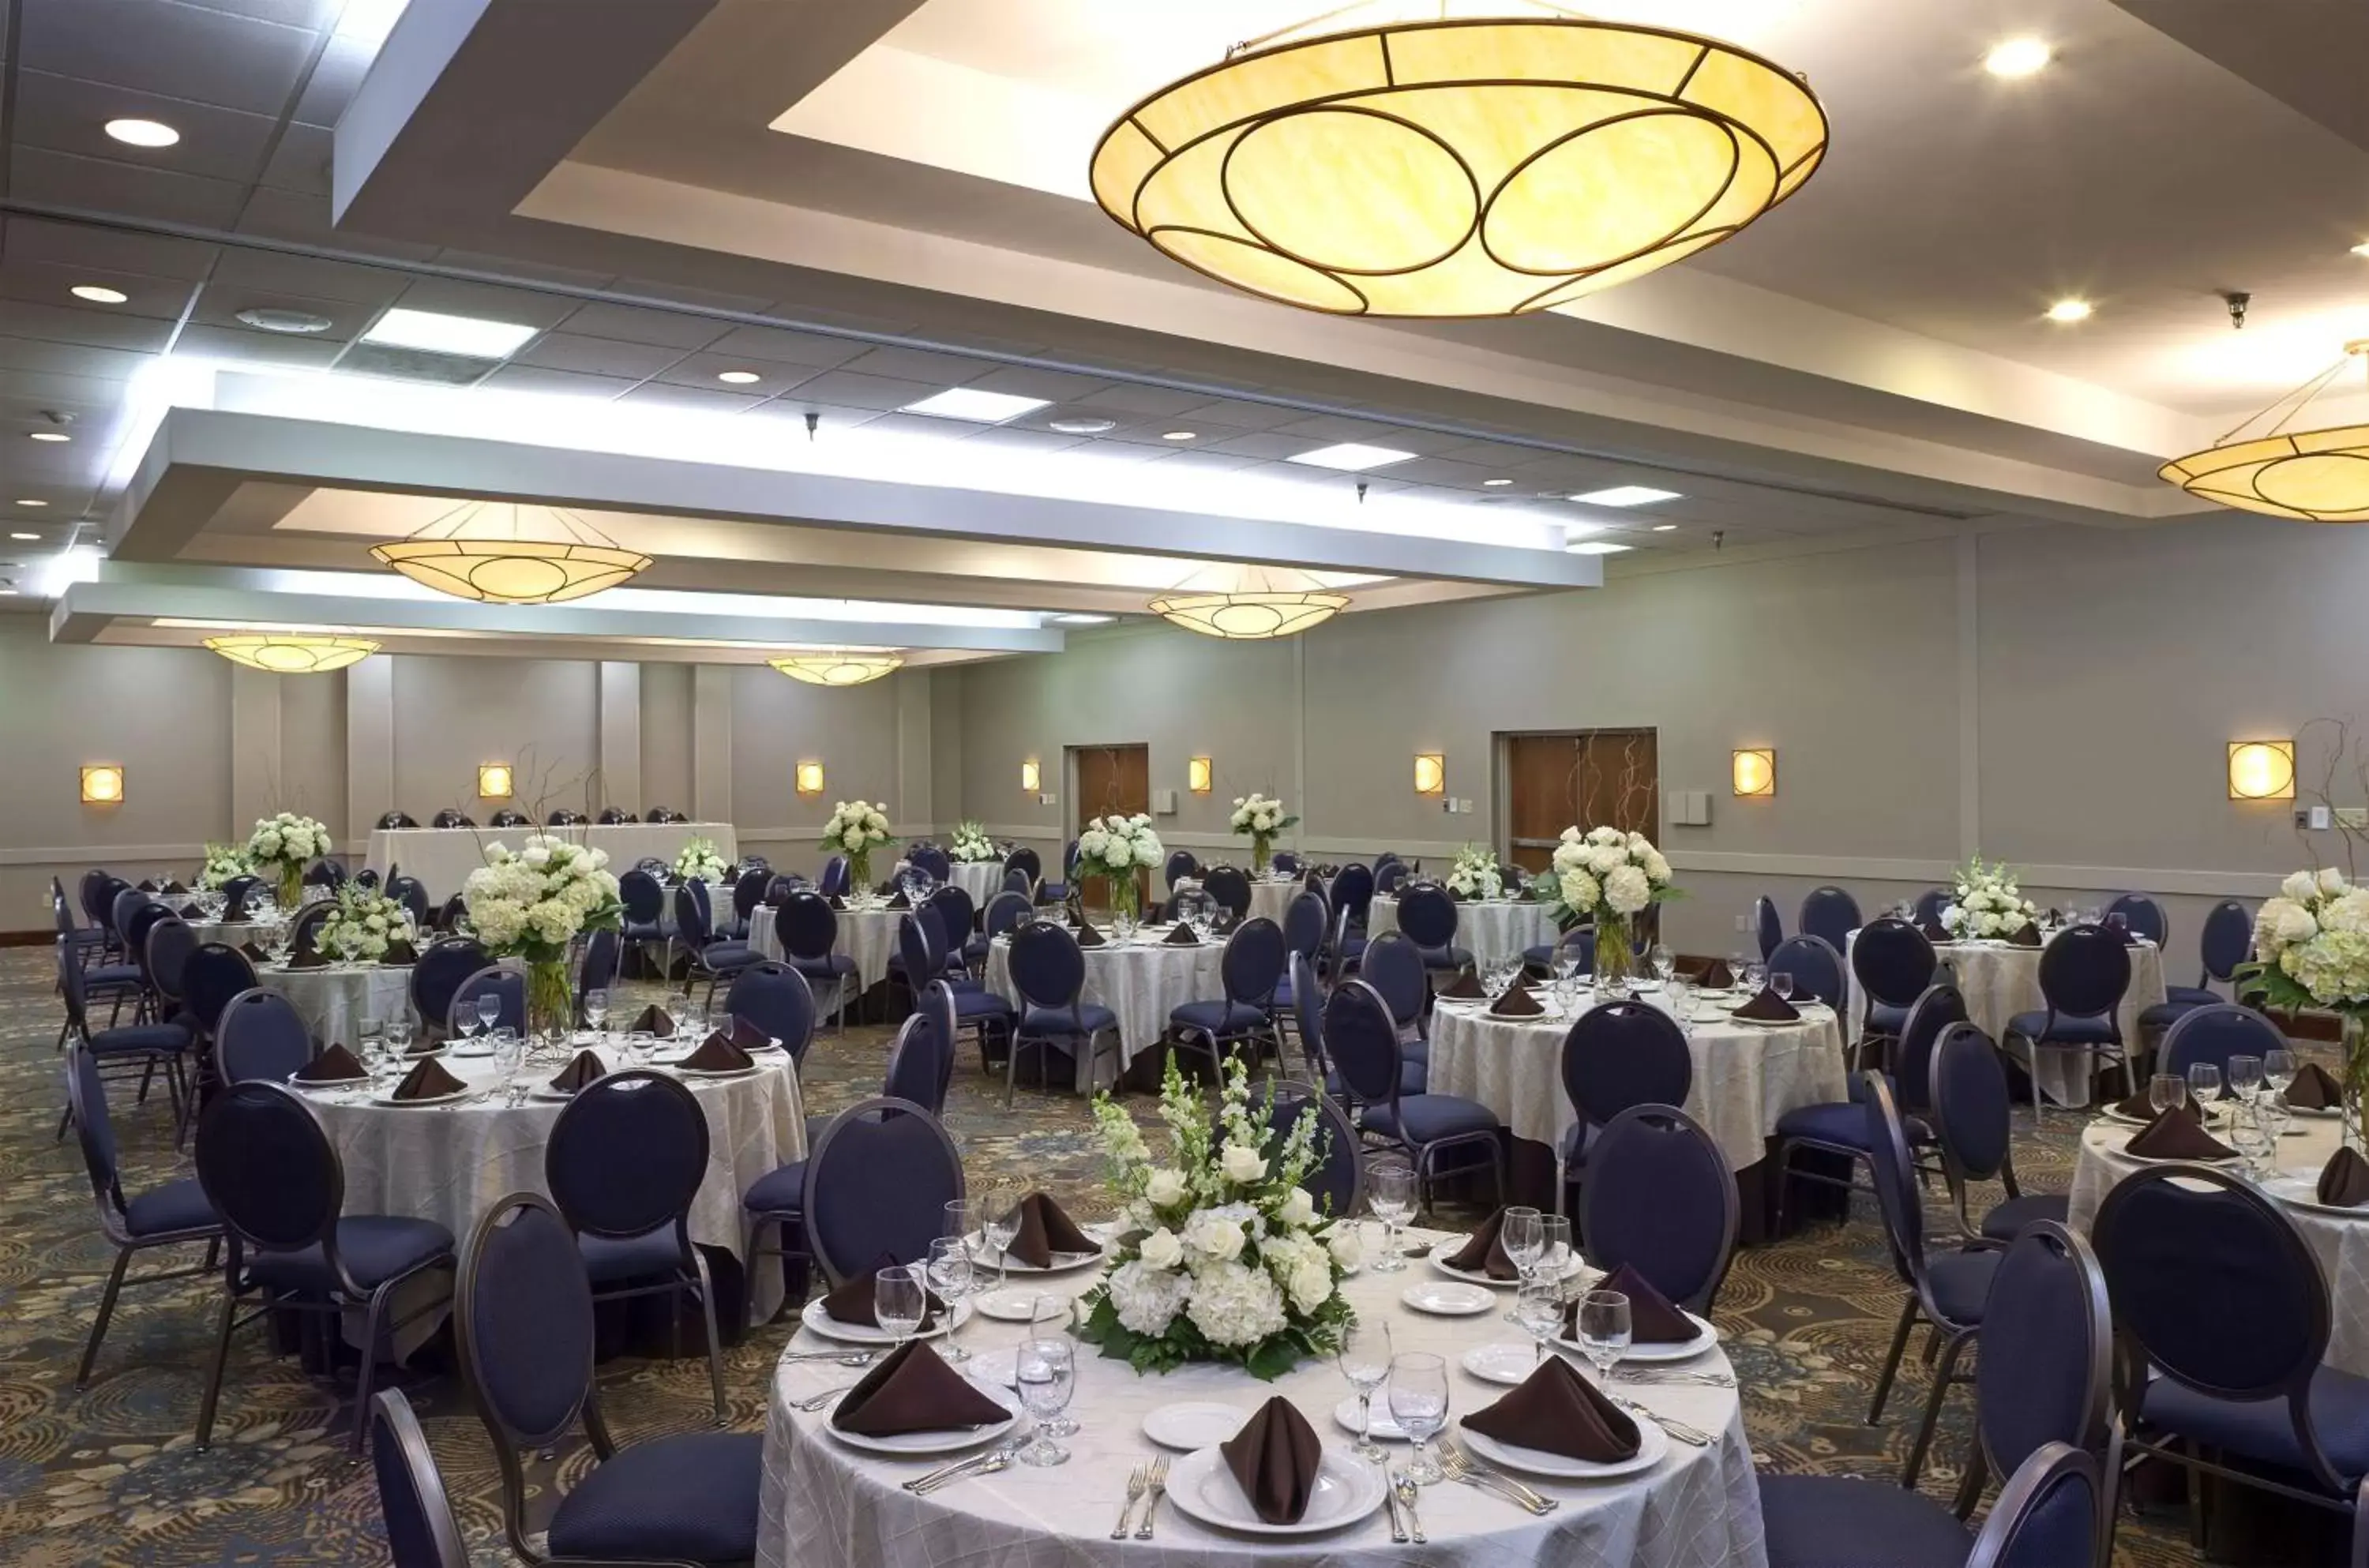 Meeting/conference room, Banquet Facilities in DoubleTree by Hilton Murfreesboro